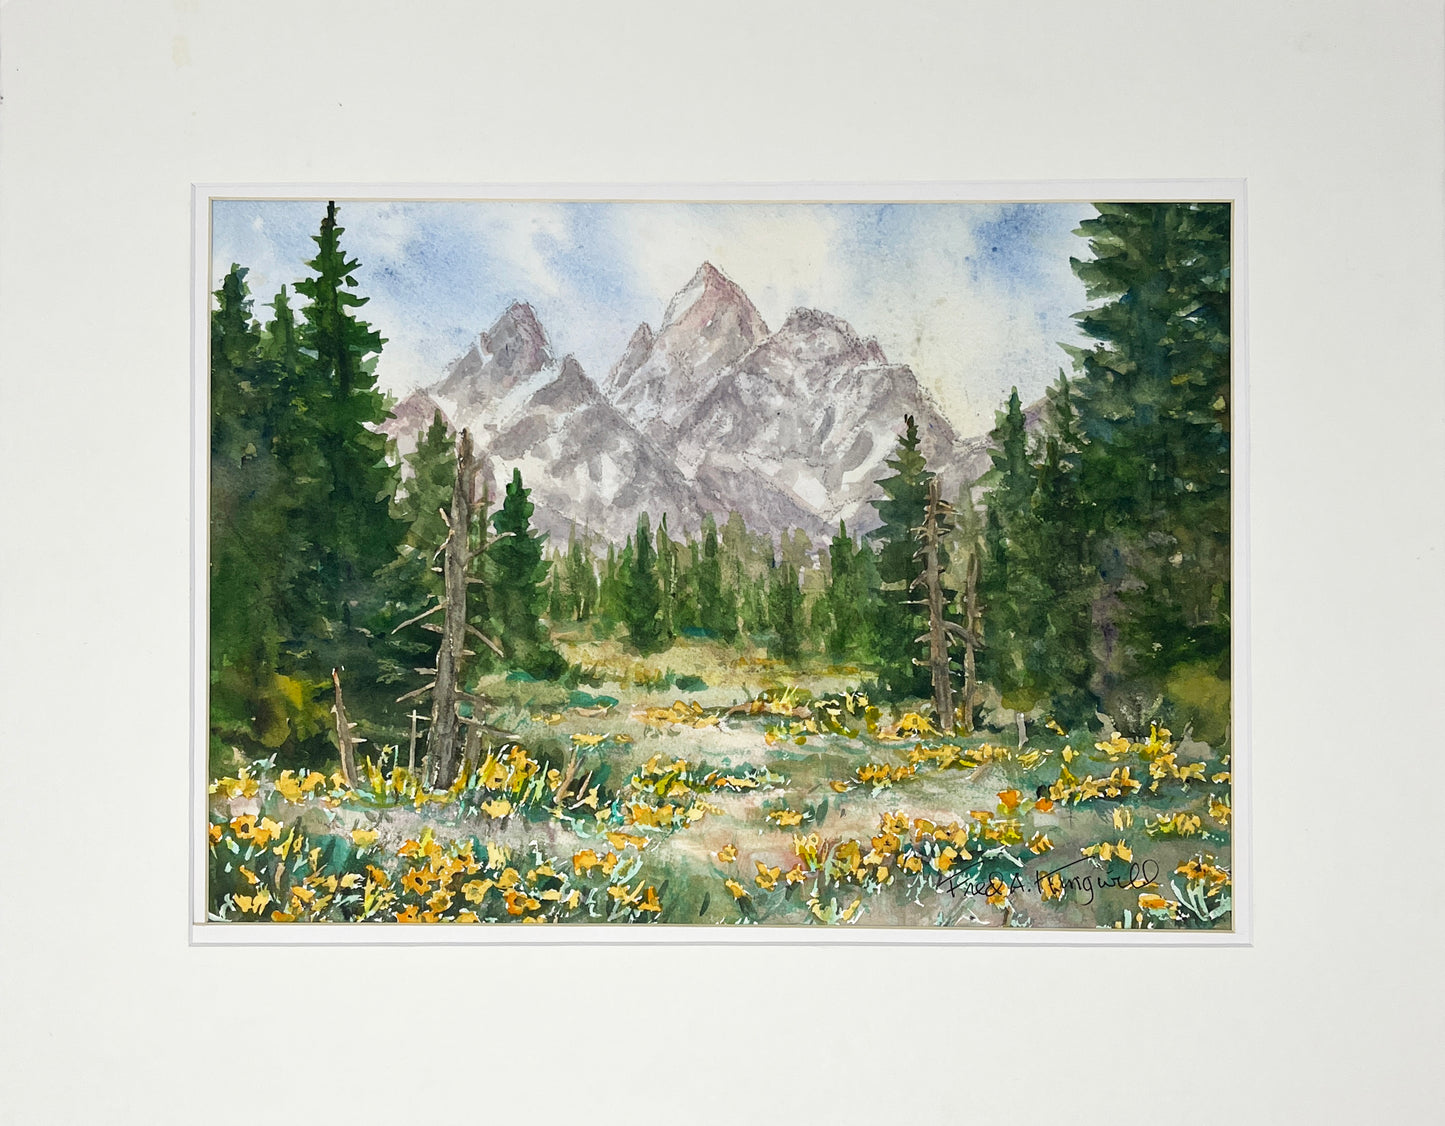 Fred Kingwill: Balsamroots in Teton